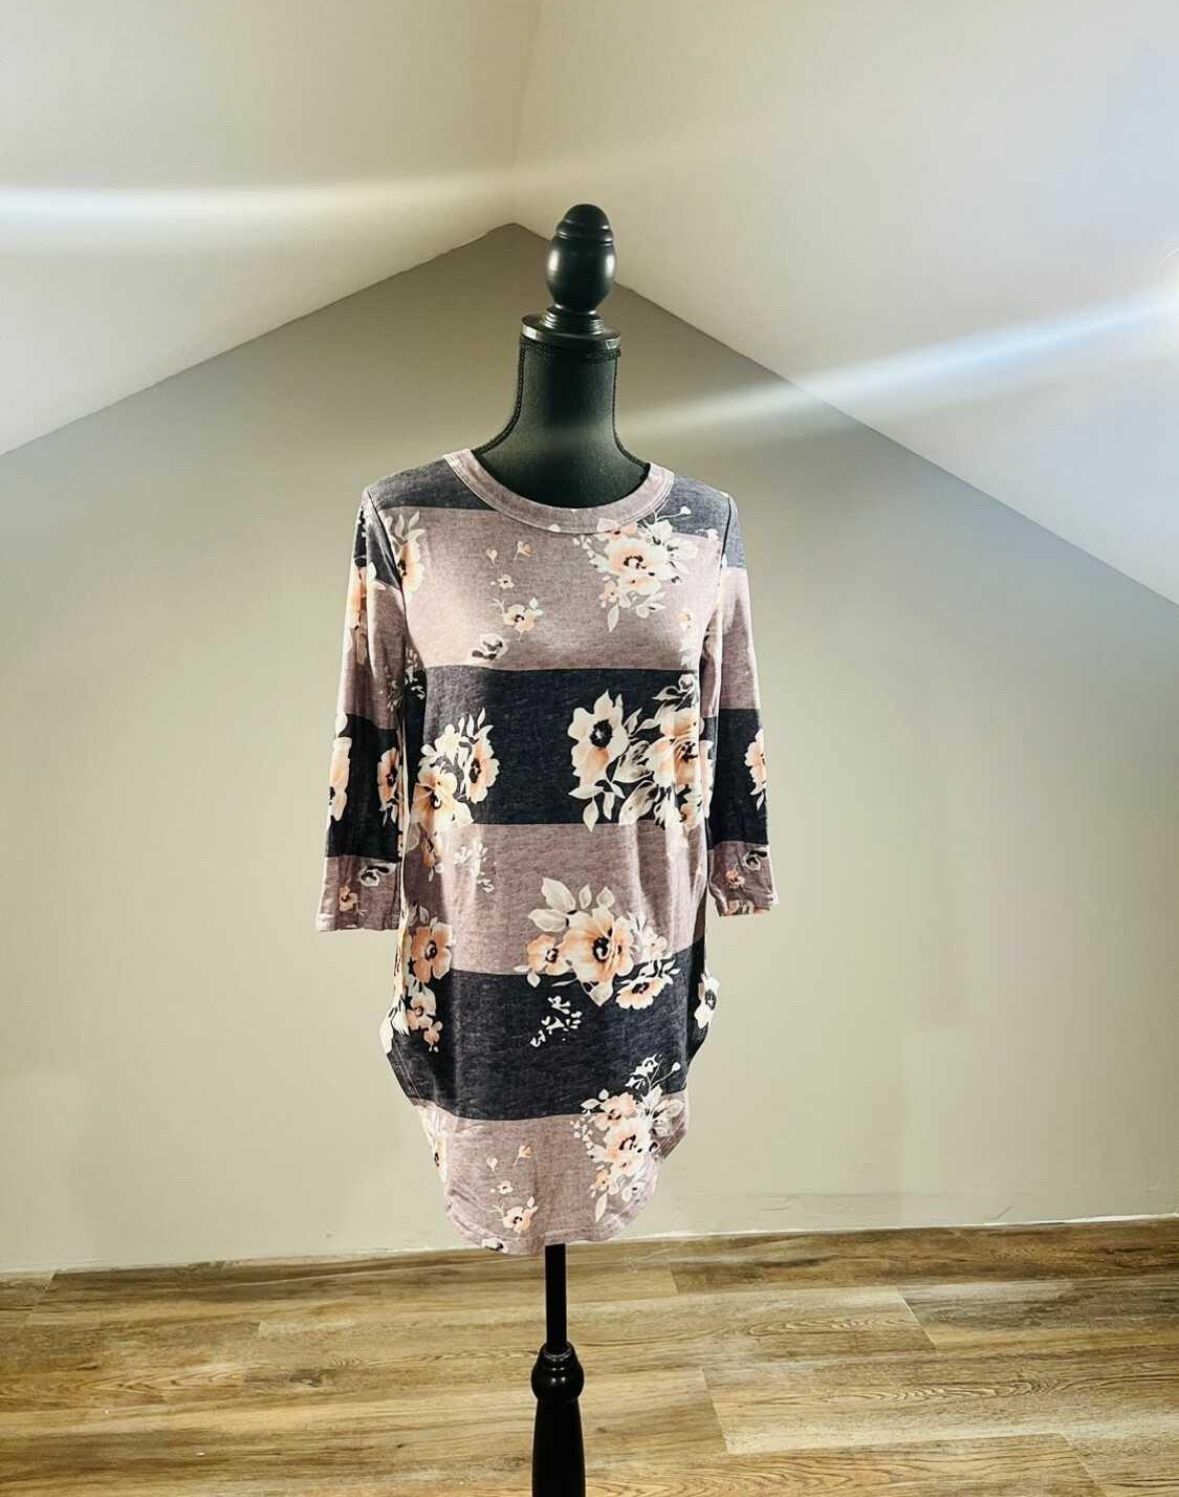 New Floral Top - Small